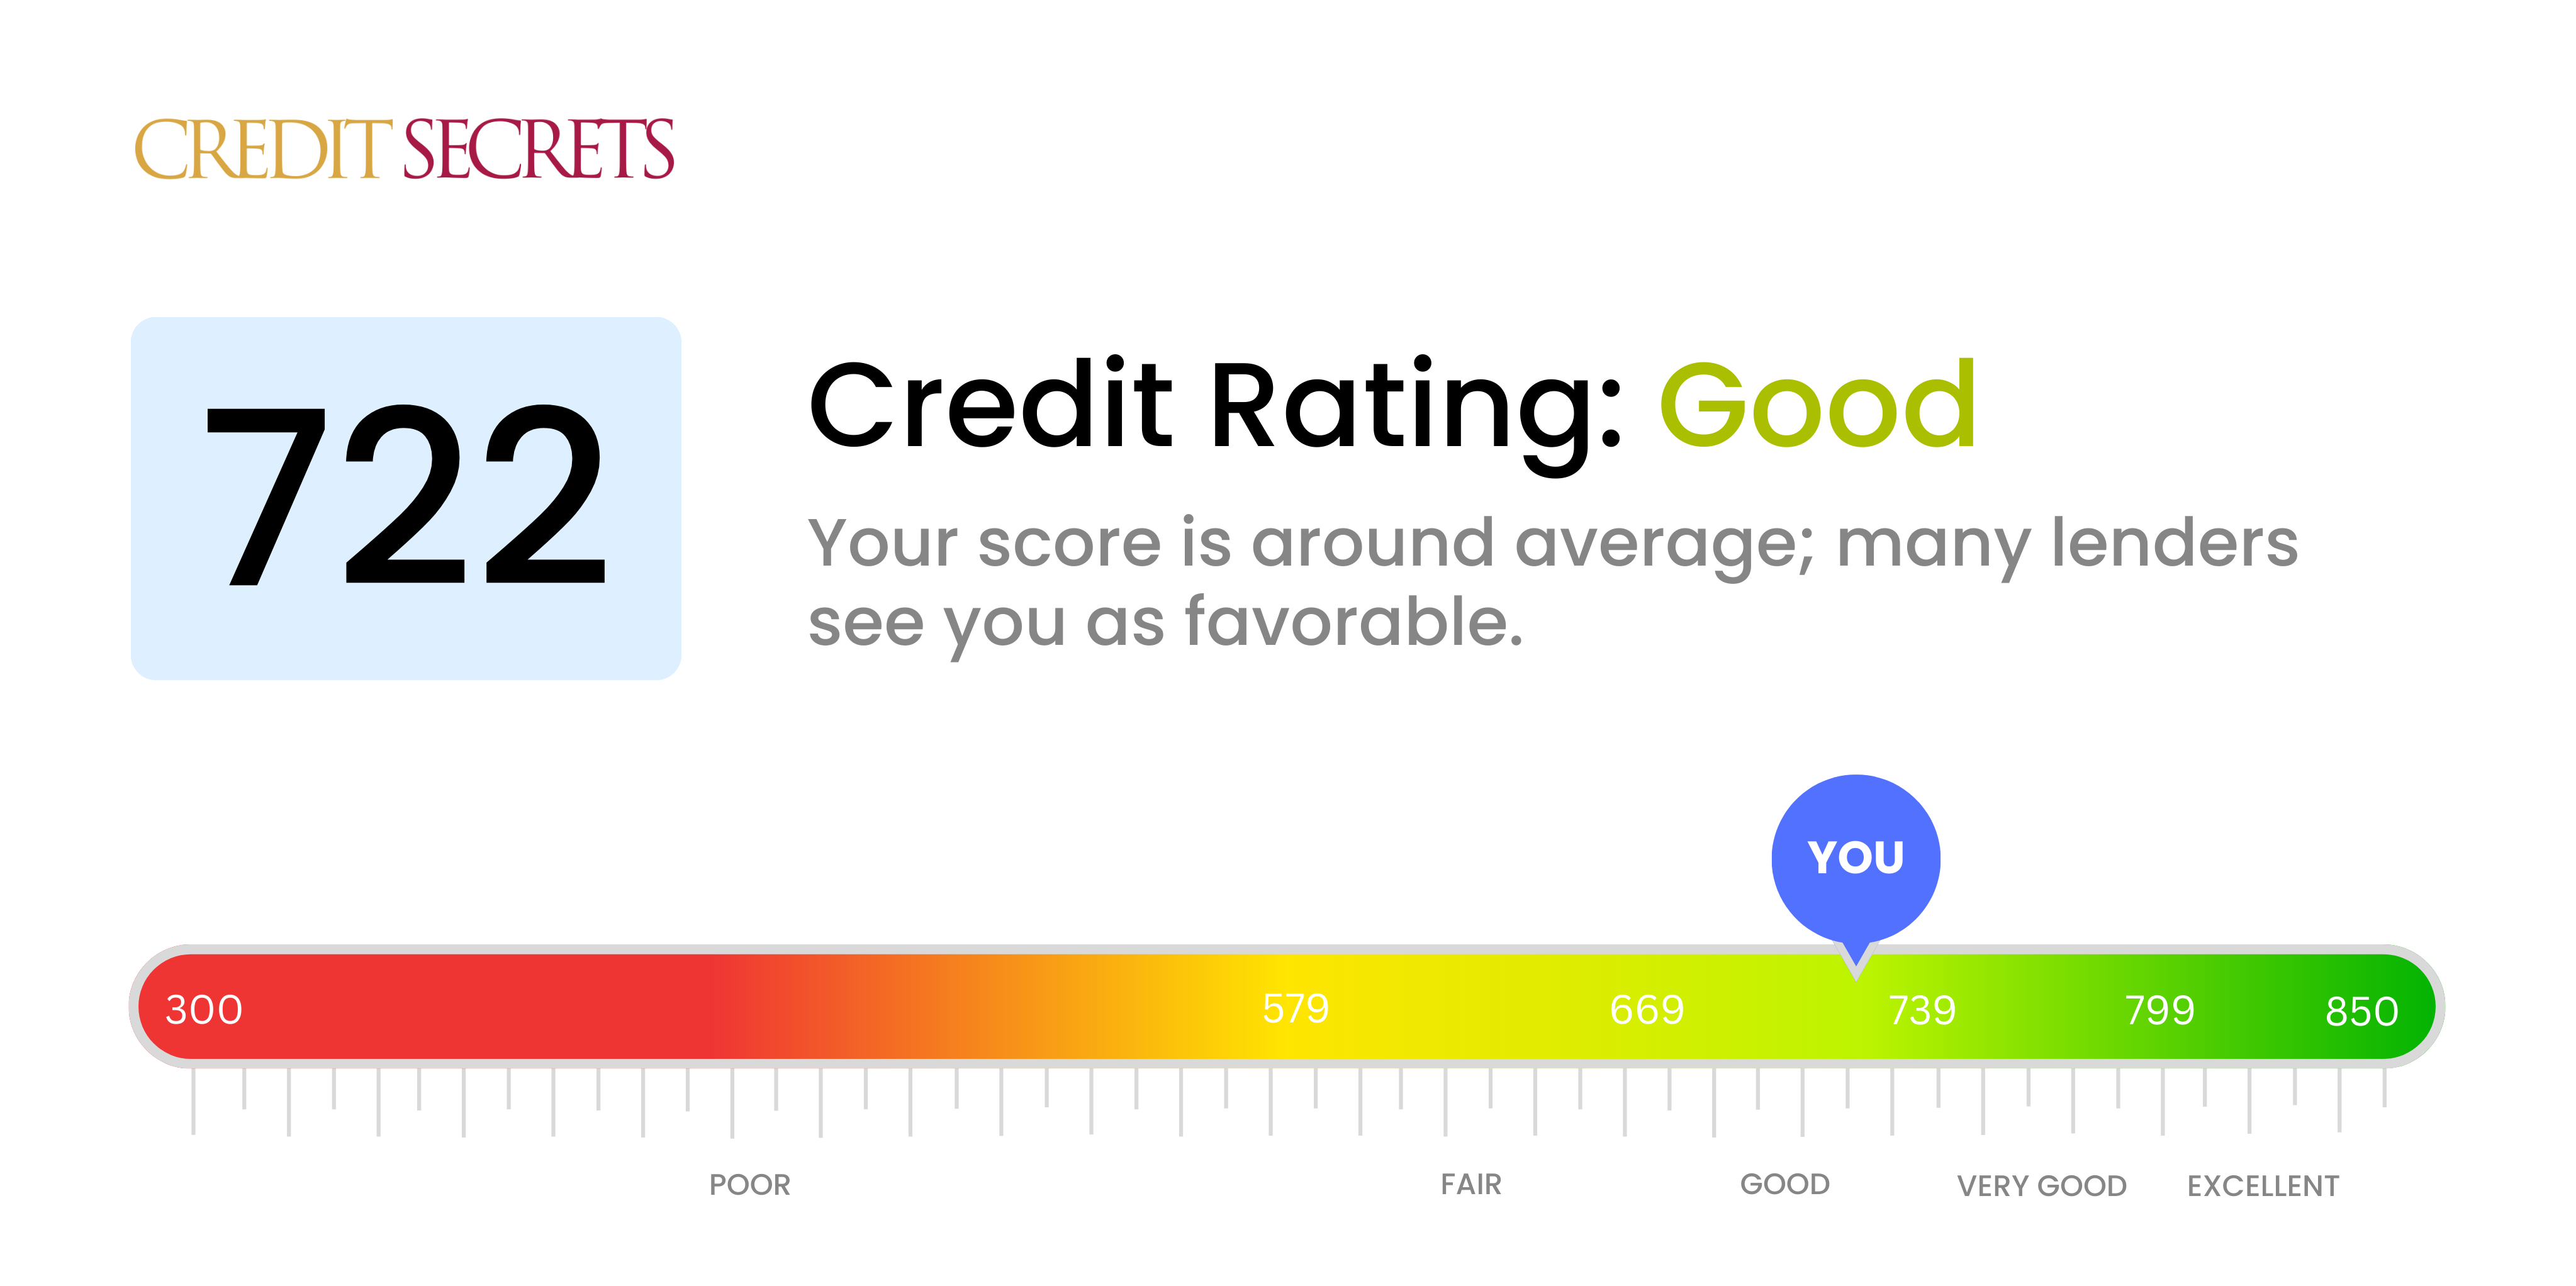 Is 722 a good credit score?